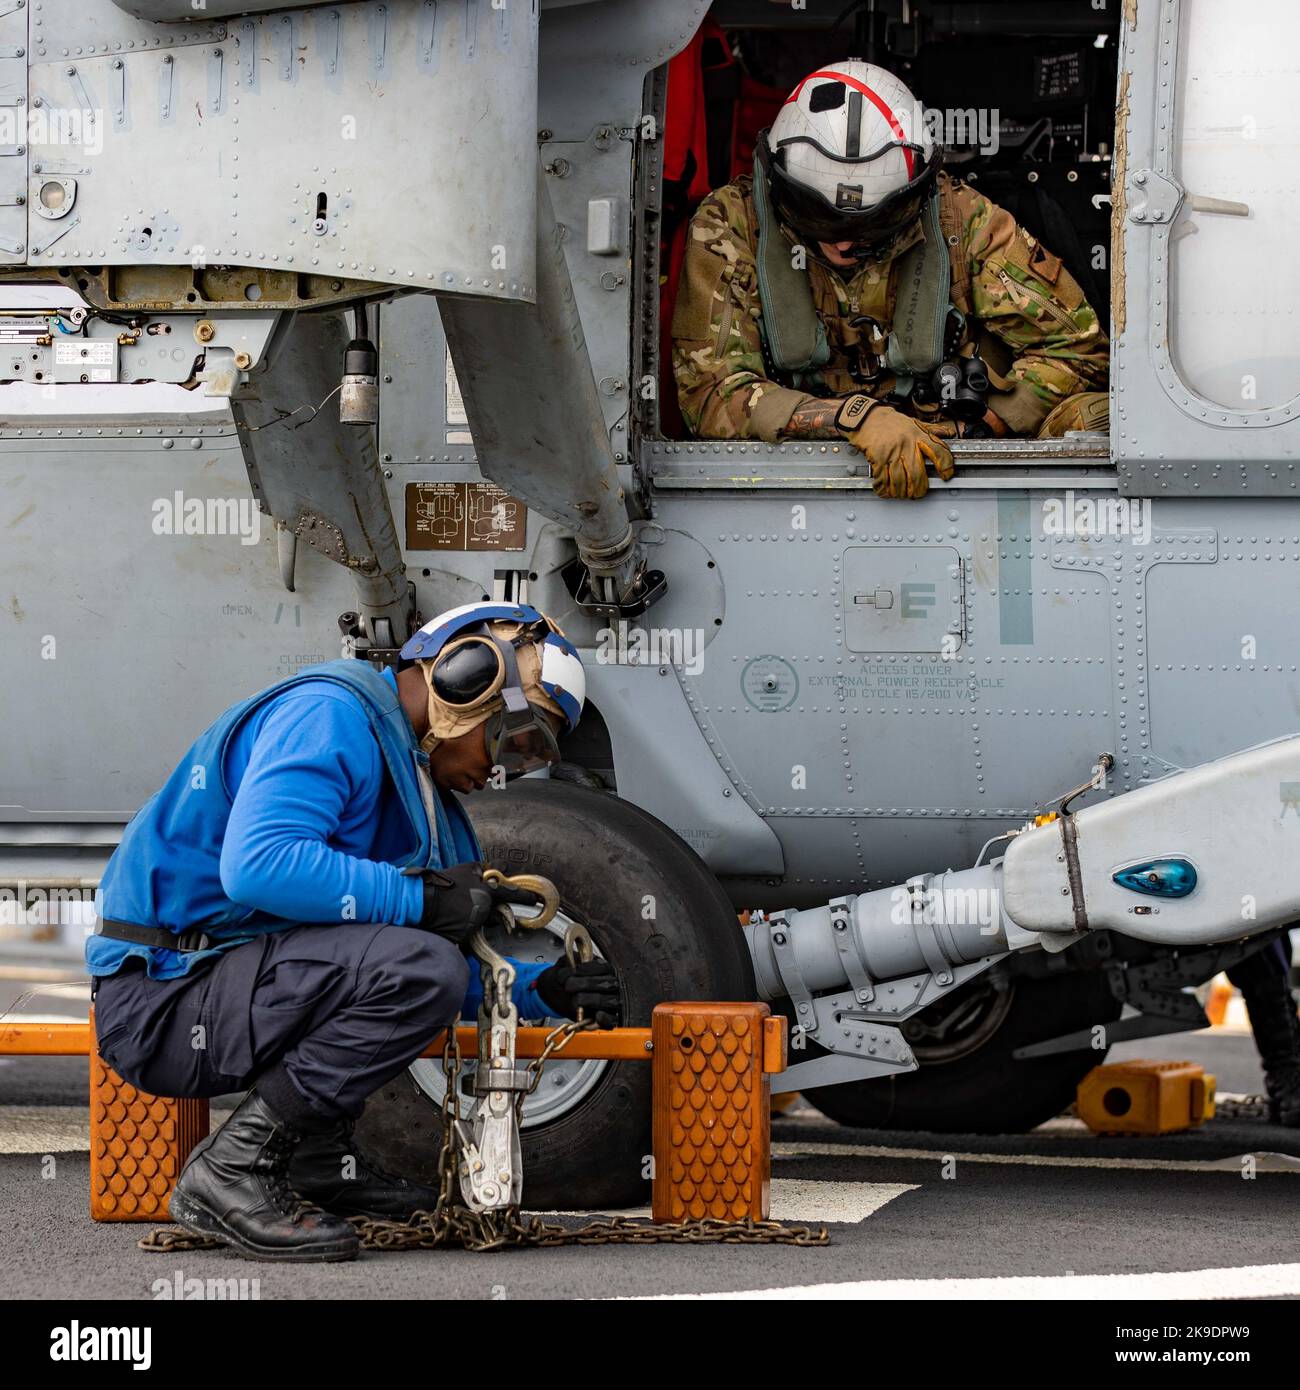 Naval Air Crewman 1st Class Bobby Nilson, right, assigned to the “Tridents” of Helicopter Sea Combat Squadron (HSC) 9, watches as Seaman Joshua Whitaker, assigned to the Arleigh Burke-class guided-missile destroyer USS Ramage (DDG 61), removes chocks and chains an MH-60S Sea Hawk helicopter, attached to the “Tridents”, during flight operations as part of the Gerald R. Ford Carrier Strike Group, Oct. 25, 2022. The first-in-class aircraft carrier USS Gerald R. Ford (CVN 78) is on its inaugural deployment conducting training and operations alongside NATO Allies and partners to enhance integration Stock Photo